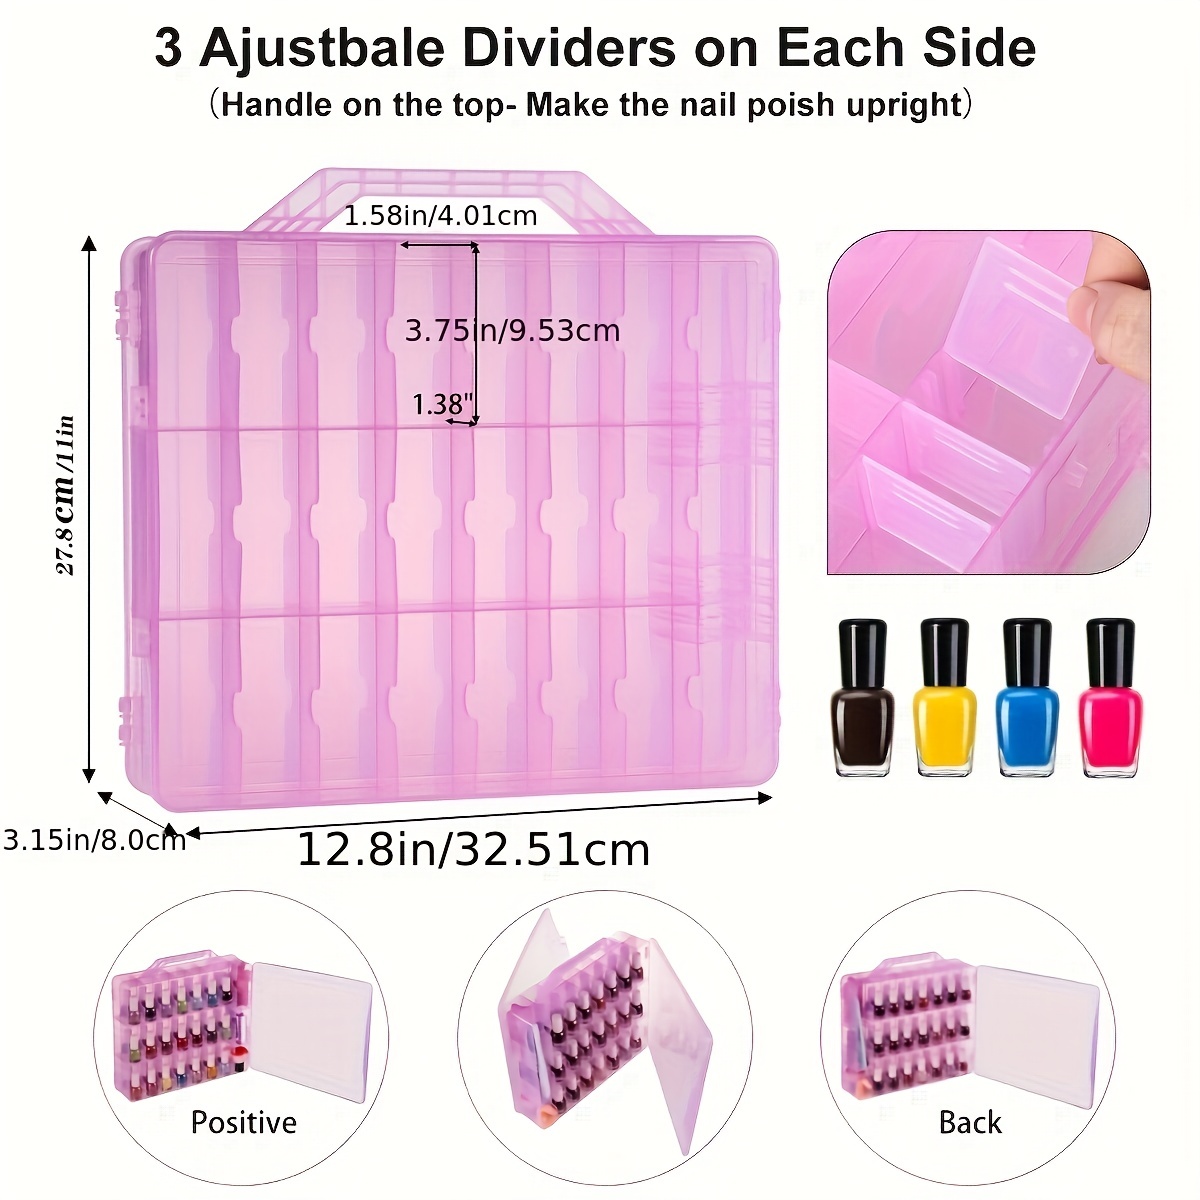  Foraineam 2 Pack Double Side Nail Polish Organizer Transparent  Nail Tools Holder Box Portable Universal Nail Polish Carrying Case with 8  Adjustable Dividers for Storage Display : Beauty & Personal Care